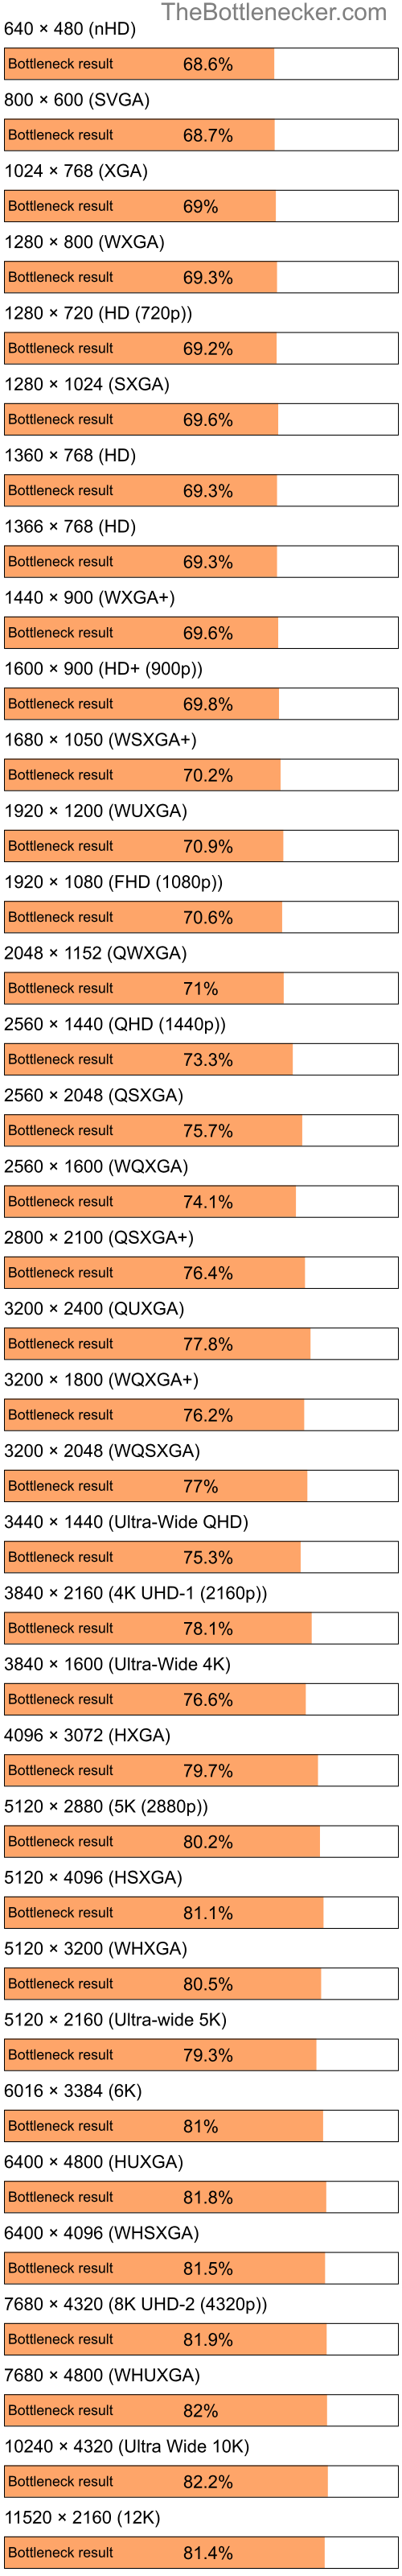 Bottleneck results by resolution for Intel Atom N280 and AMD Mobility Radeon 4100 in7 Days to Die